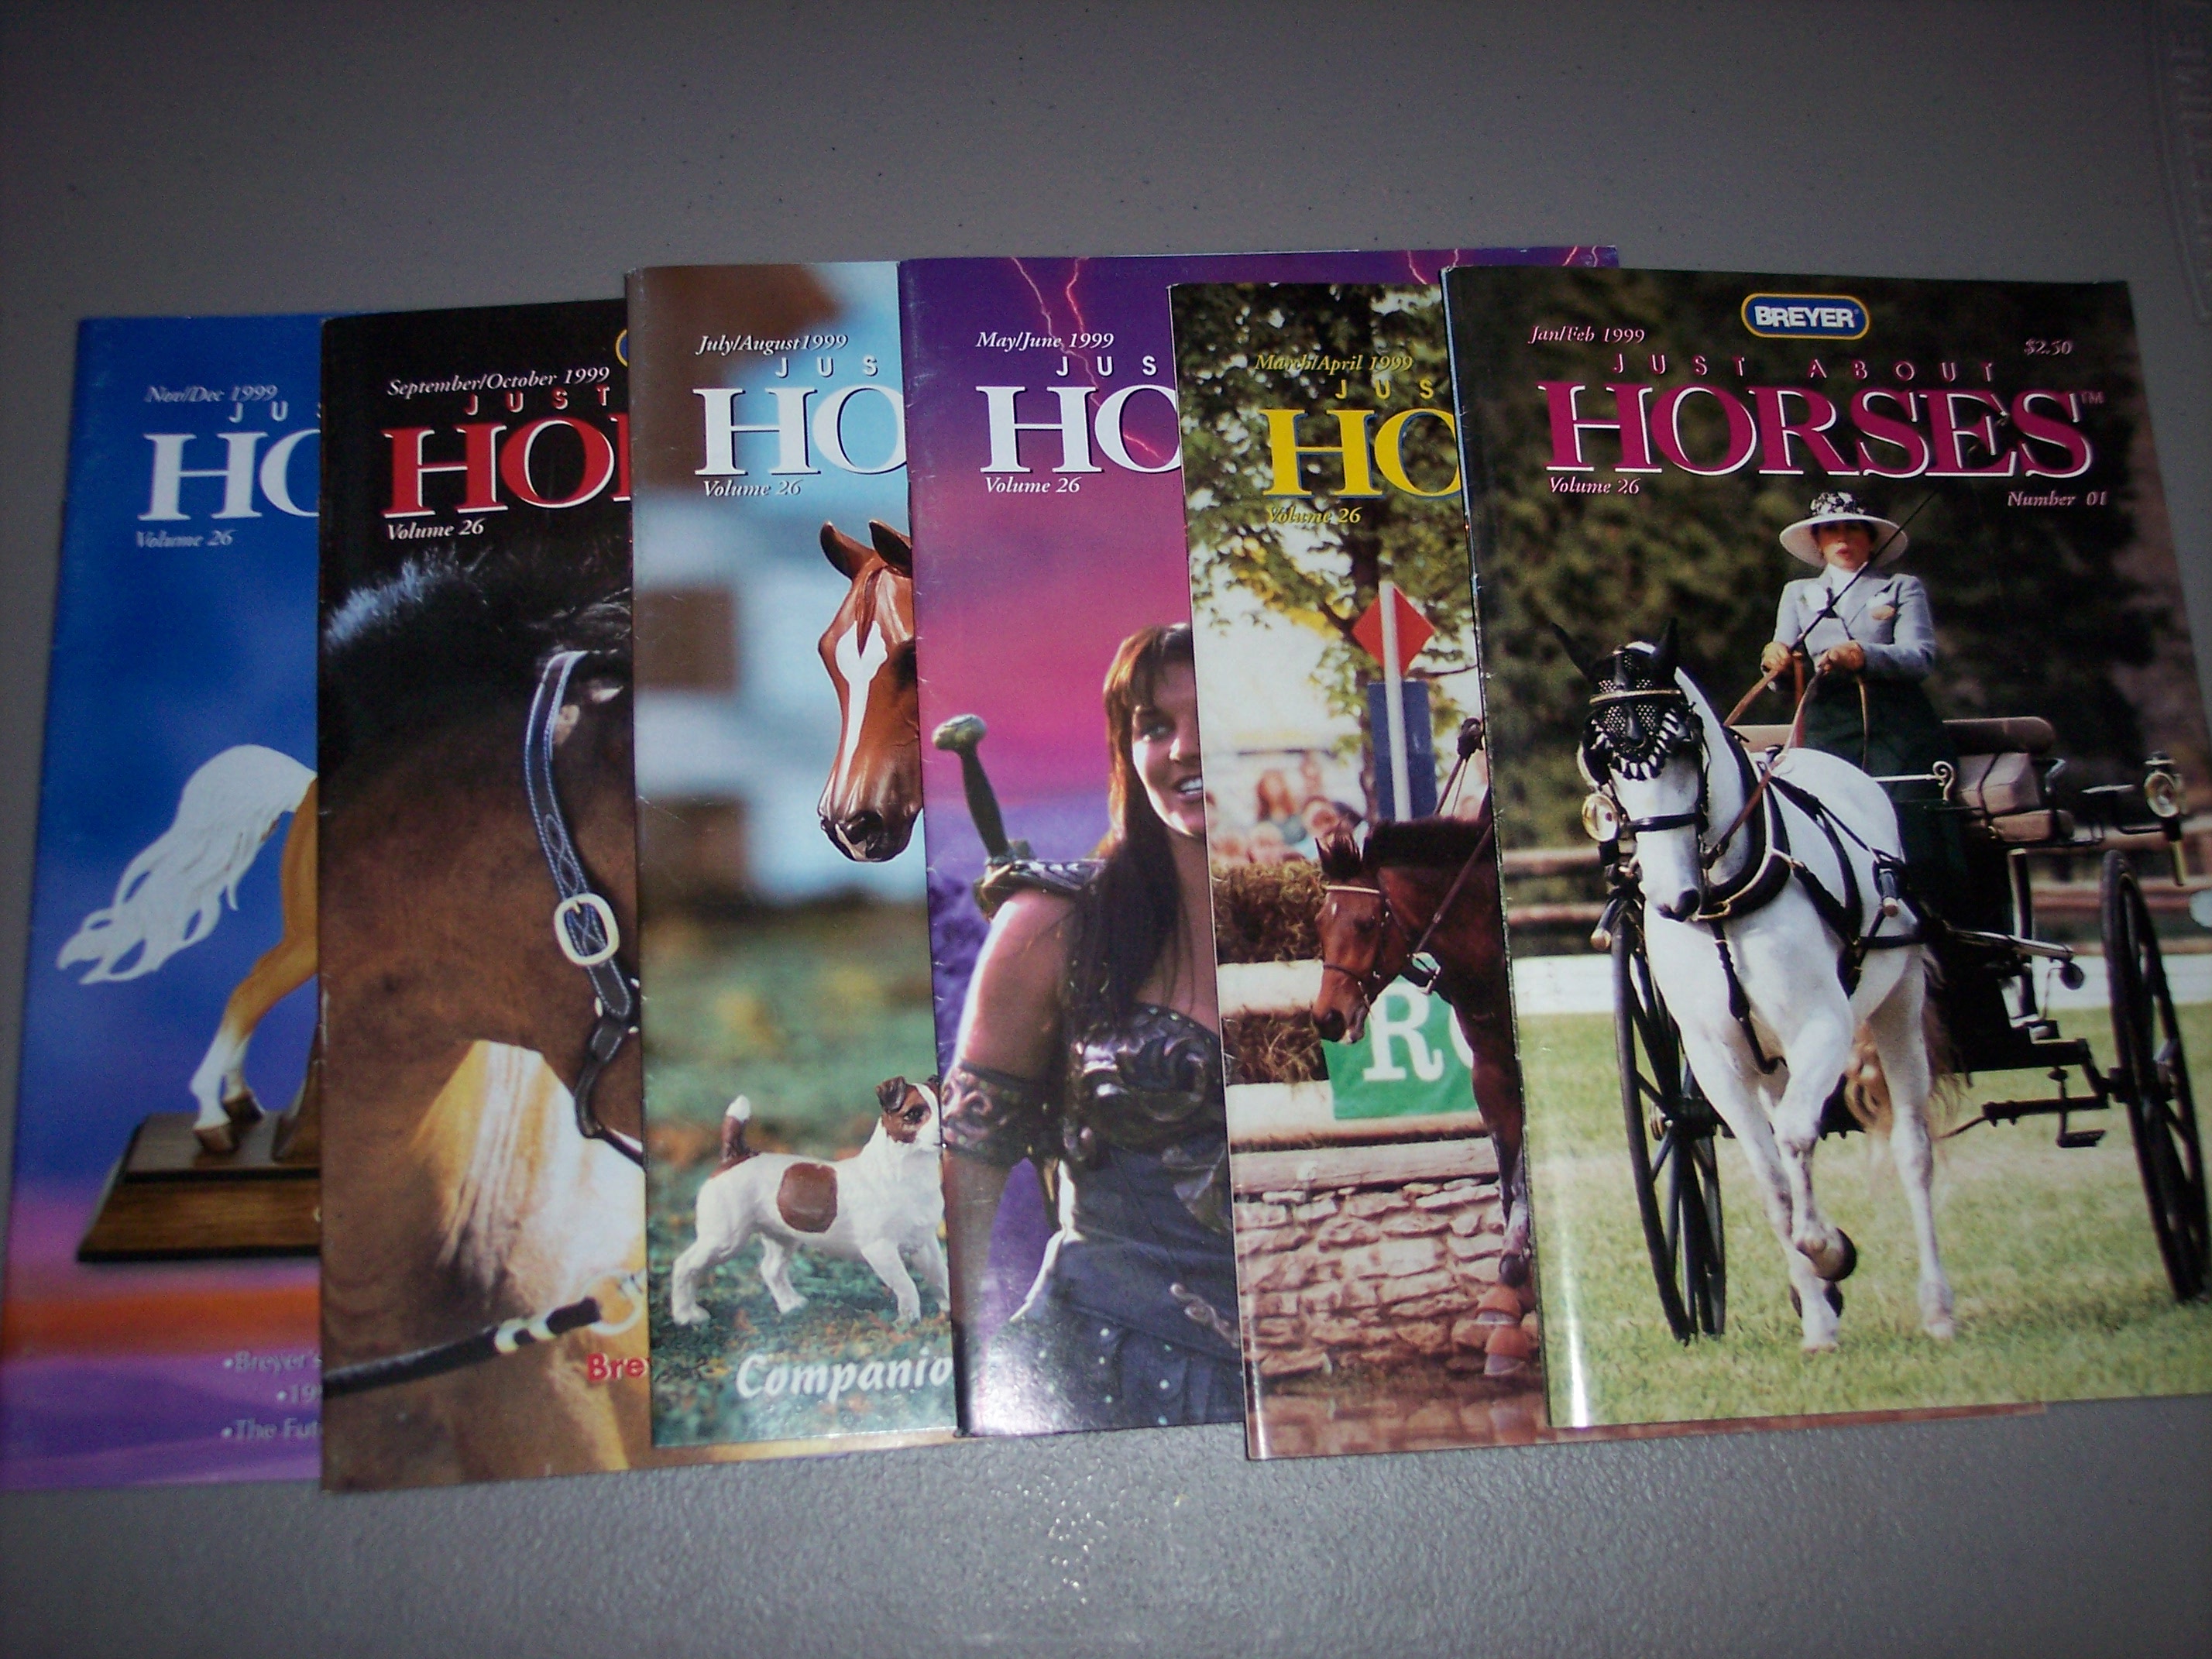 1999 Breyer Just About Horses JAH Magazines Full Set 6 issues good condition 